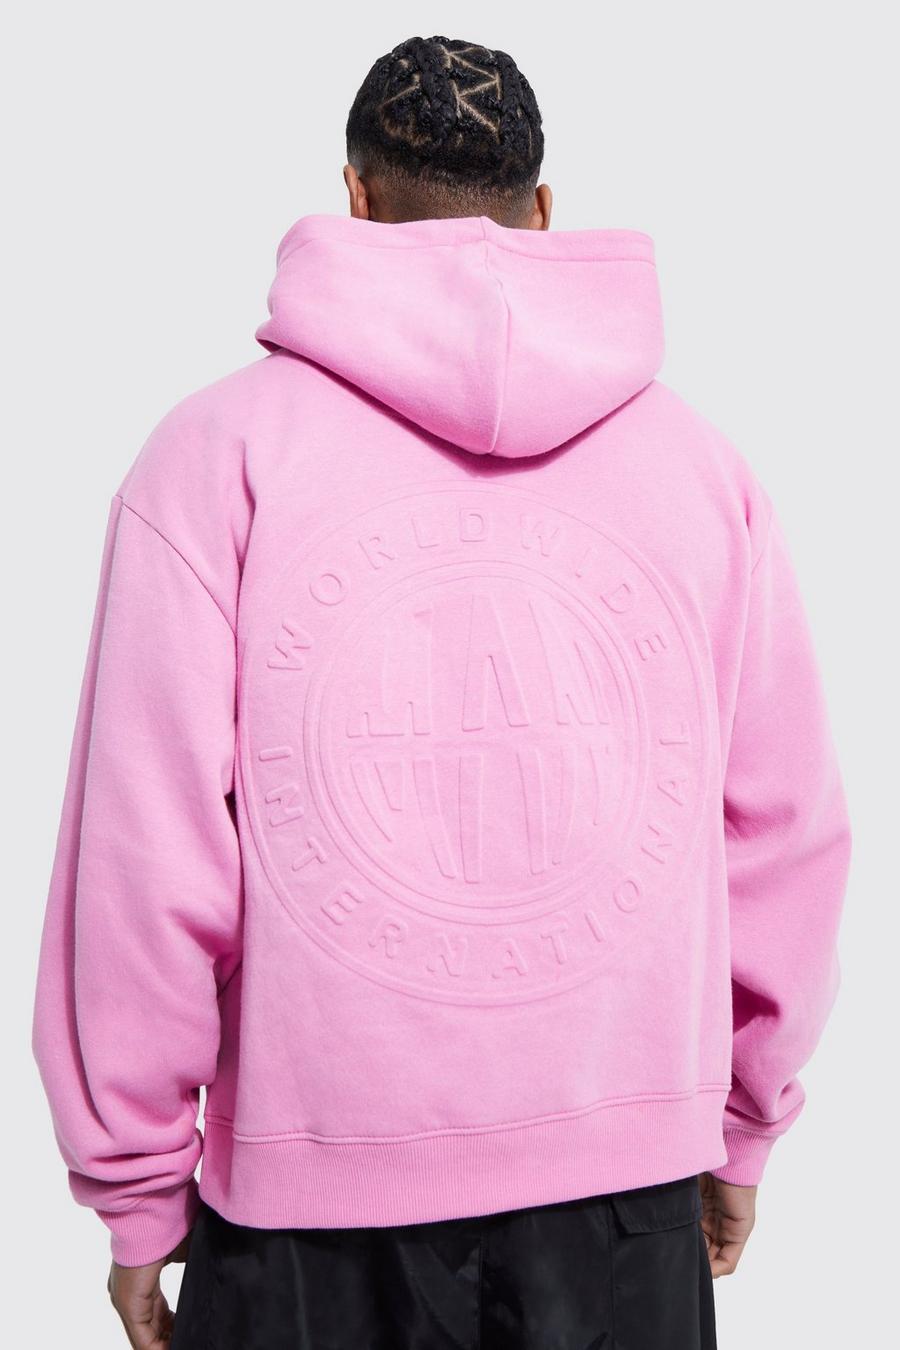 Oversized Boxy Embossed Hoodie, Pink rosa